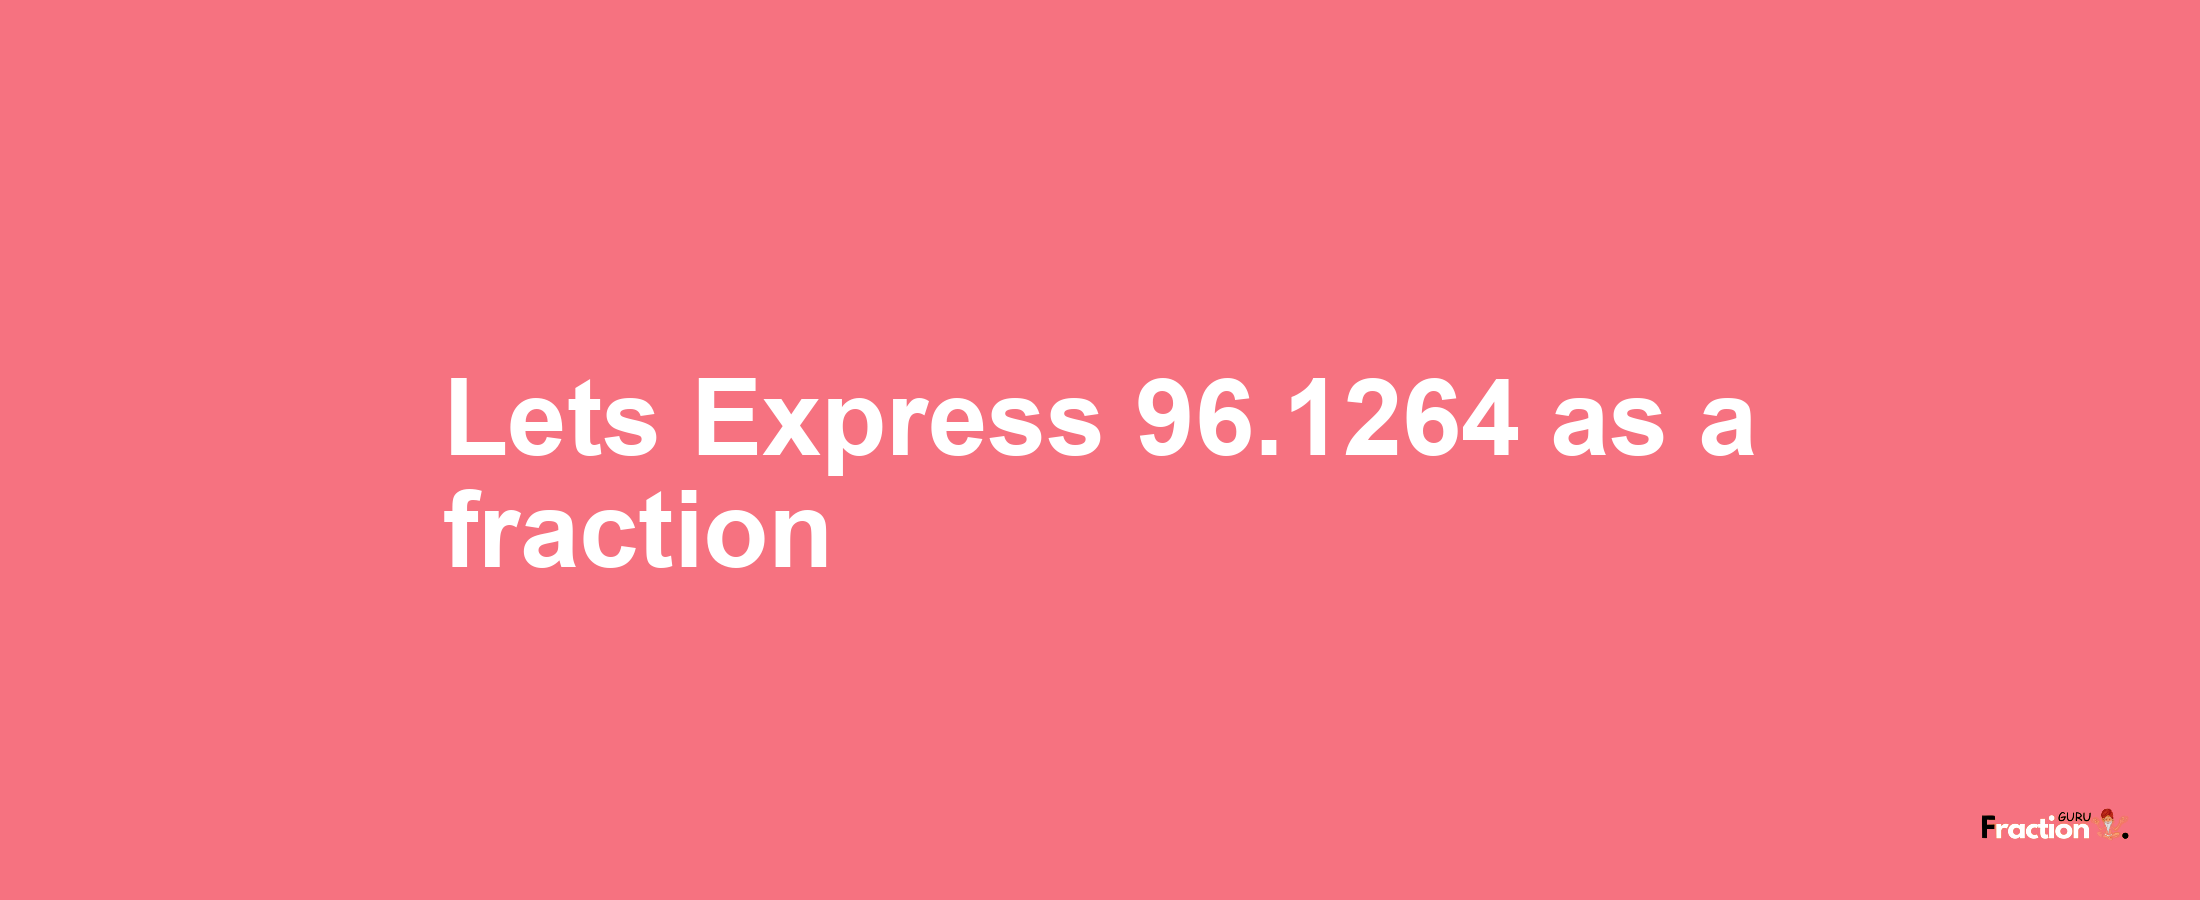 Lets Express 96.1264 as afraction